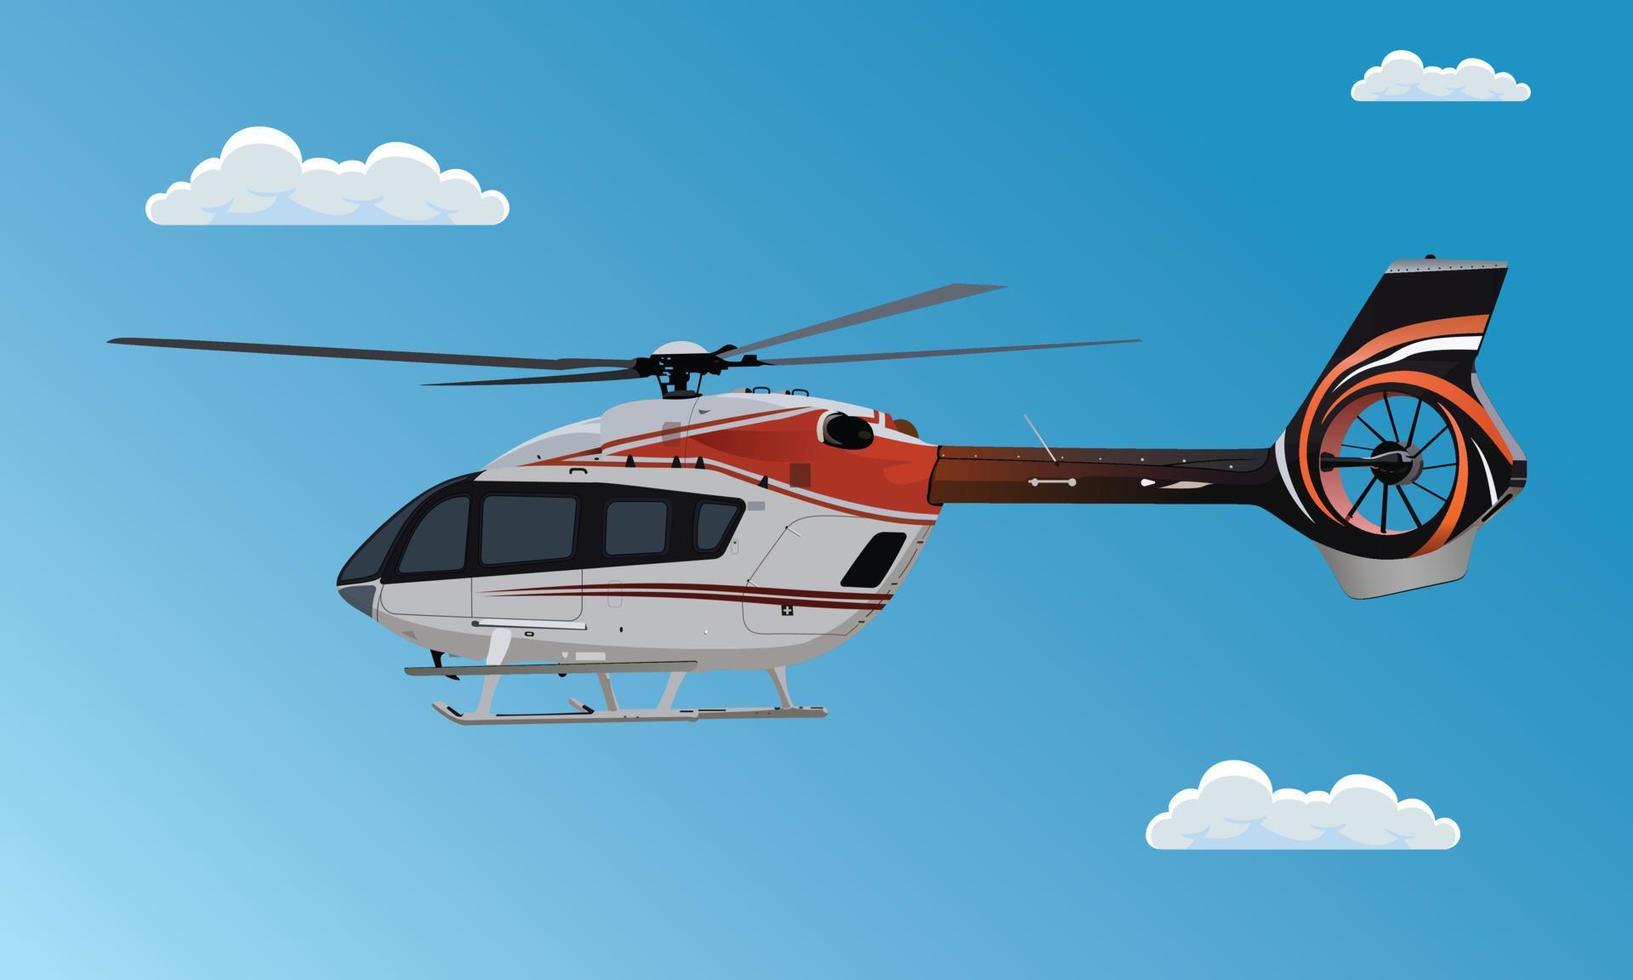 Helicopter flying in sky, Helicopter fly in clouds, Flying Chopper Air Transportation. Private helicopter . Flat Vector realistic Illustration on blue sky background.